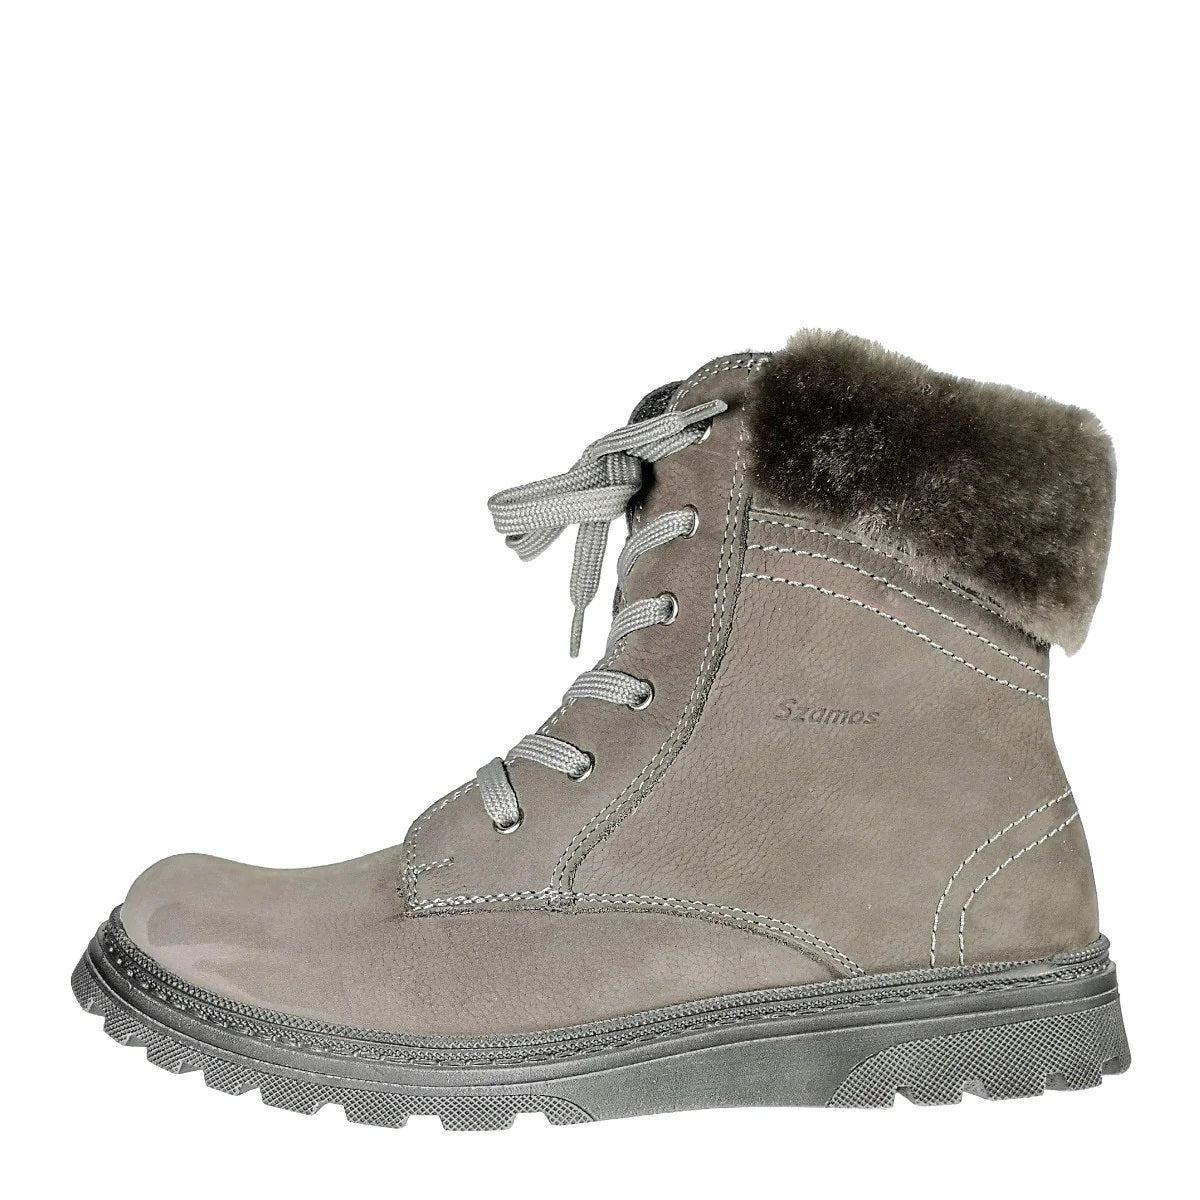 Premium quality insulated boots made from 100% genuine leather lining and upper, grey with fur heel liner. This Szamos Kids product meets the highest expectations of healthy and comfortable kids shoes. The exceptional comfort these shoes provide assure the well-being and happiness of your child.